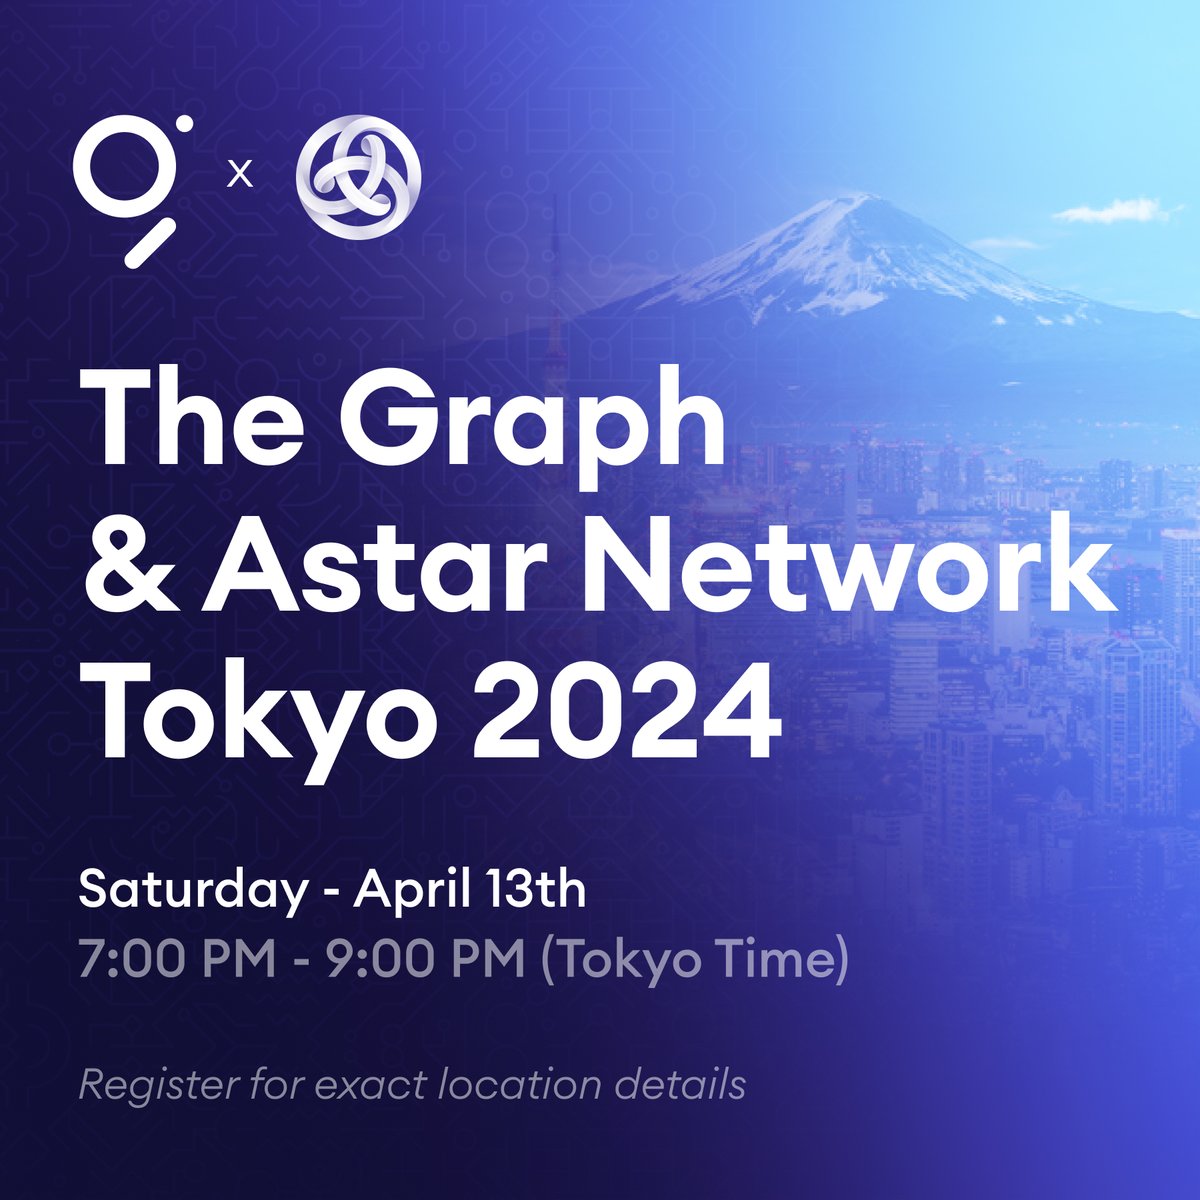 📣 Don't miss this! Join members of The Graph & @AstarNetwork communities for the official side event of @teamz_inc’s Web3/AI Summit in Tokyo 🇯🇵 📅 Sat., April 13th (7pm-9pm) Come meet community leaders & celebrate web3 innovation! Details 🔽 lu.ma/thegraphtokyo